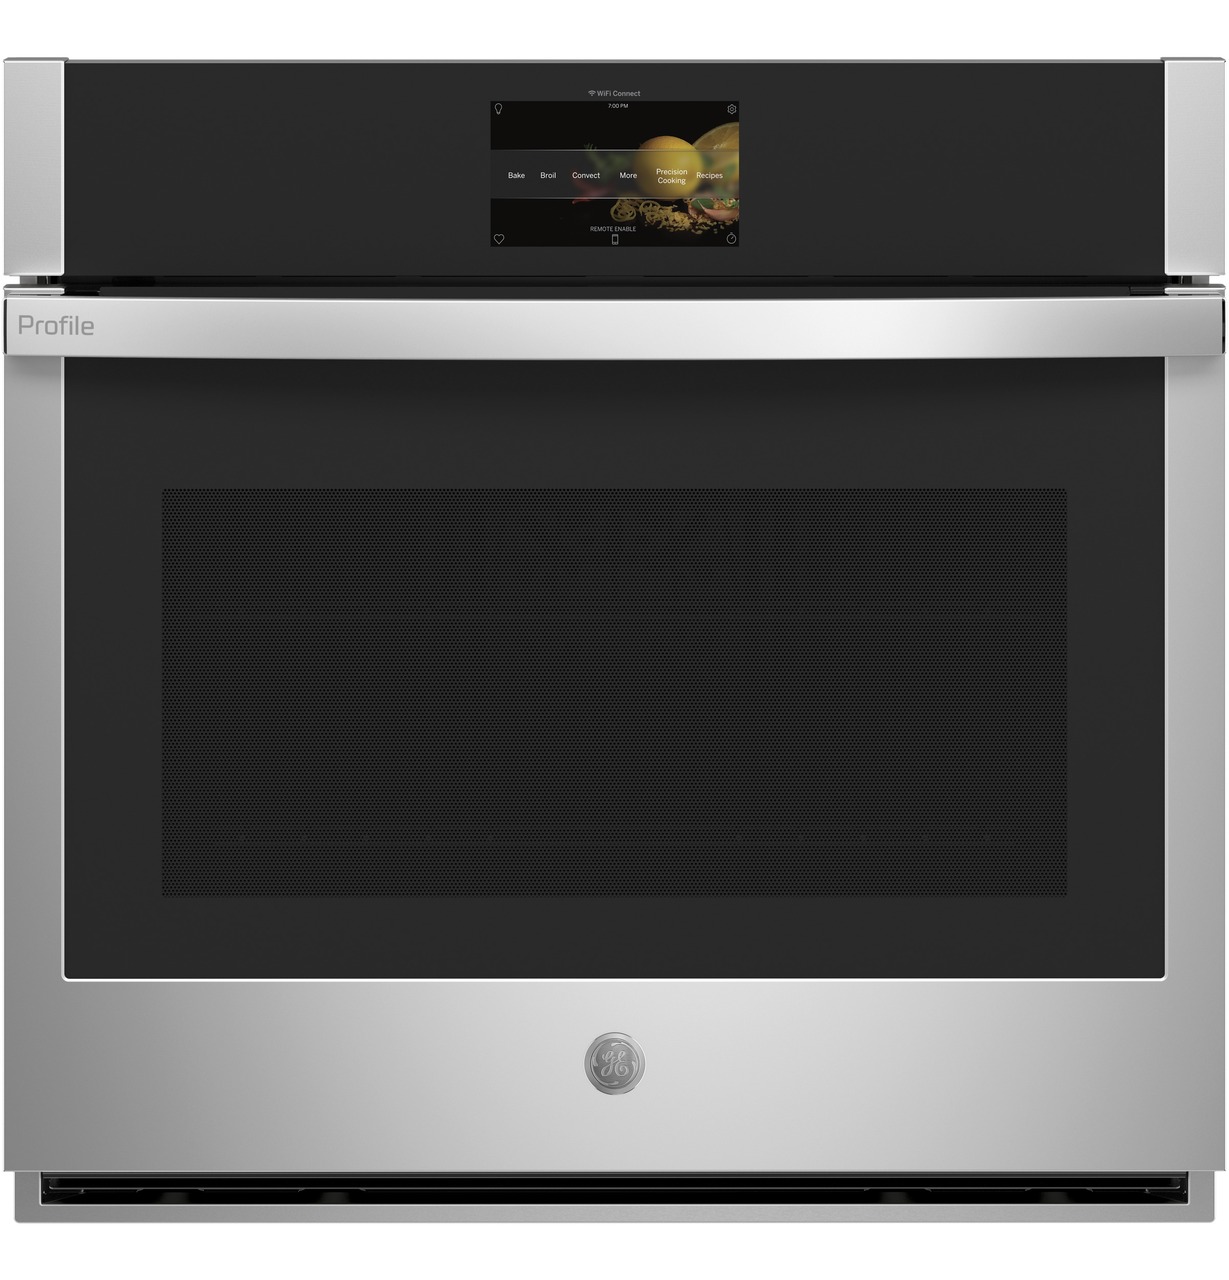 GE smart convection single wall oven with built-in air fryer and in-oven camera.